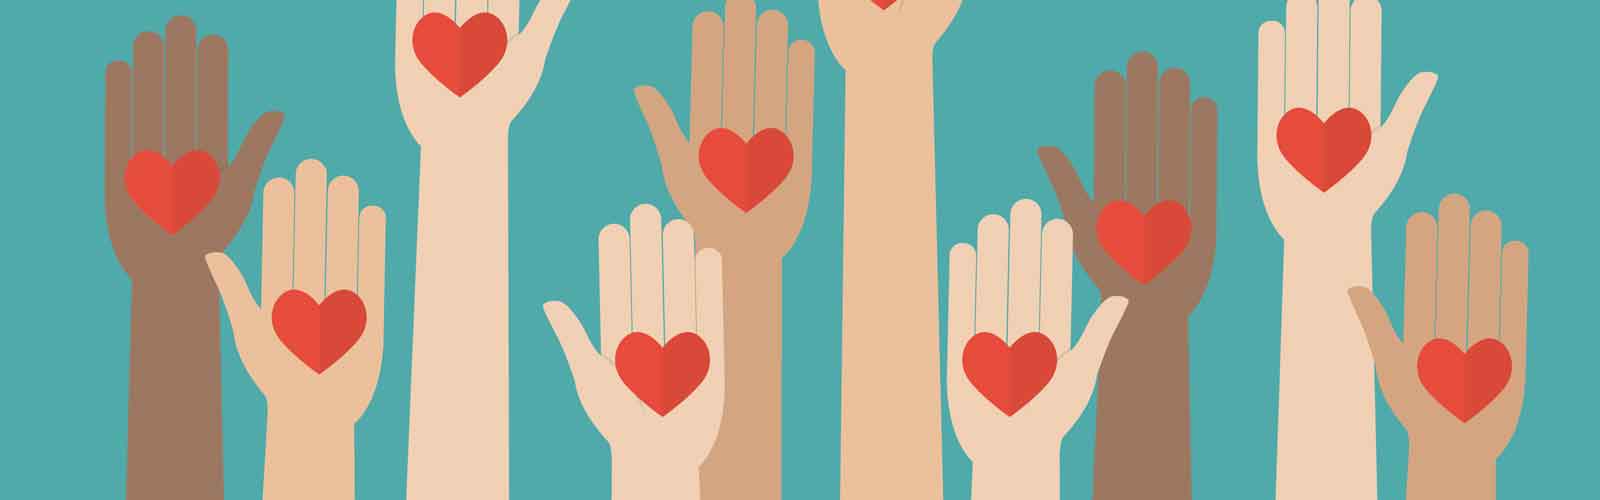 graphic depicting multicolored hands reaching out with hearts